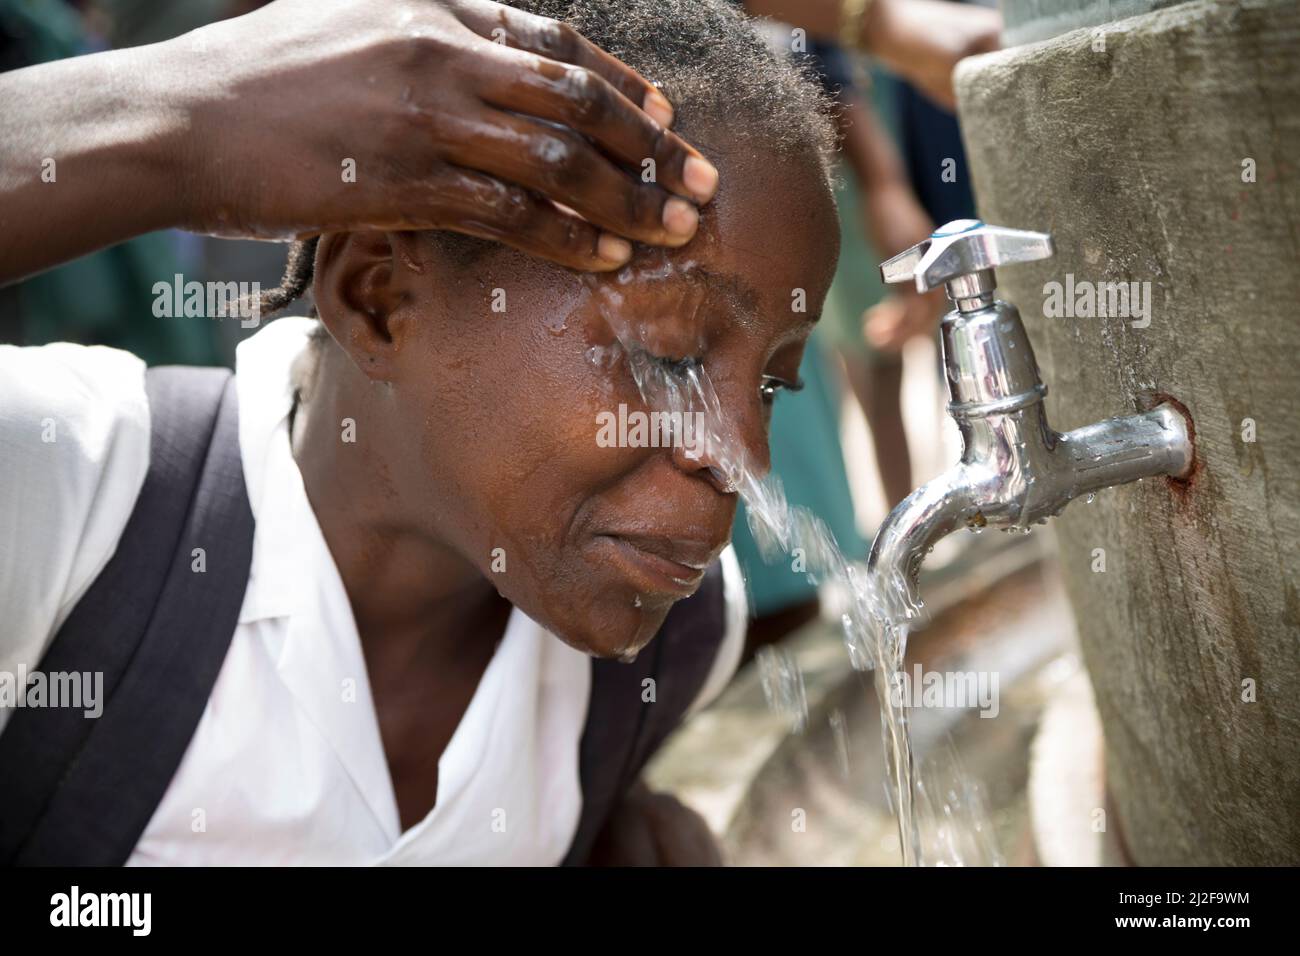 School students access clean drinking and washing water from a fountain in their school courtyard in Oshana Region, Namibia, Africa. Stock Photo